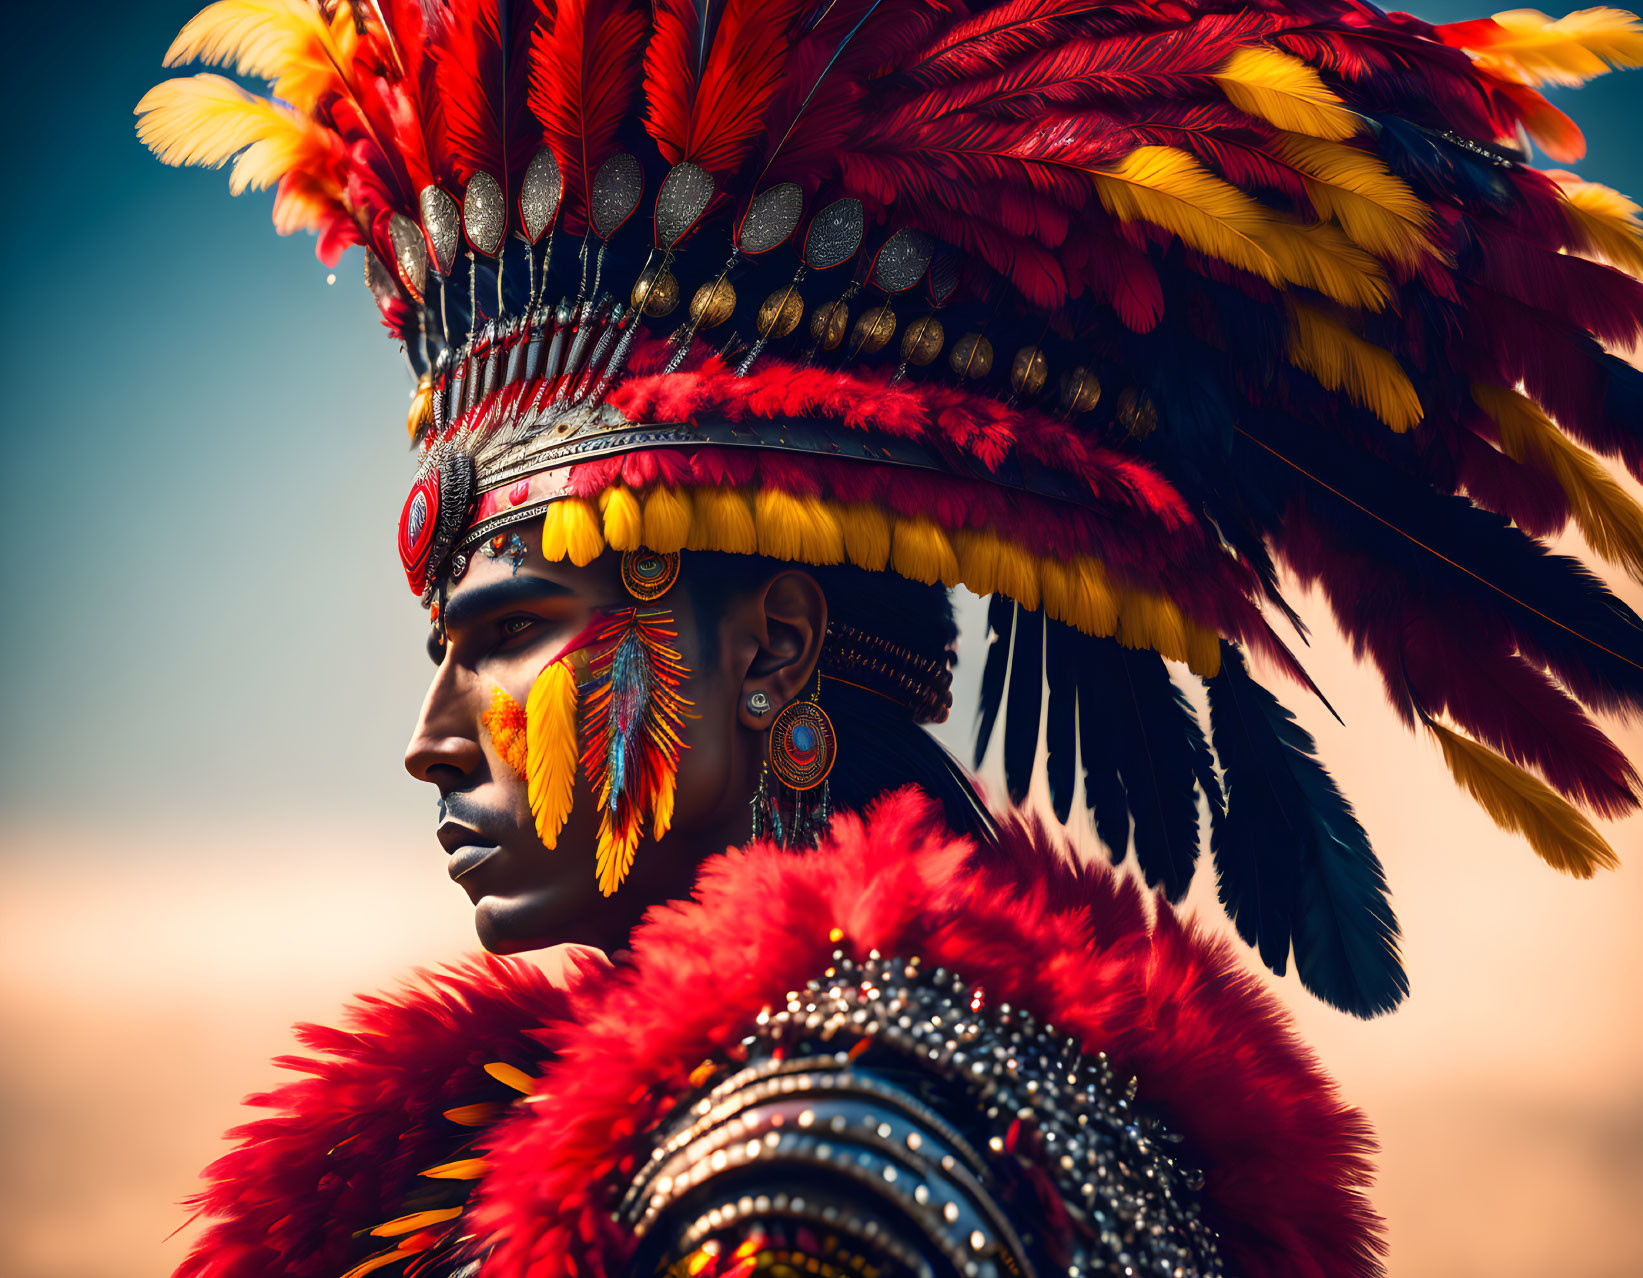 Colorful Feathered Headdress Portrait Against Cloudy Sky